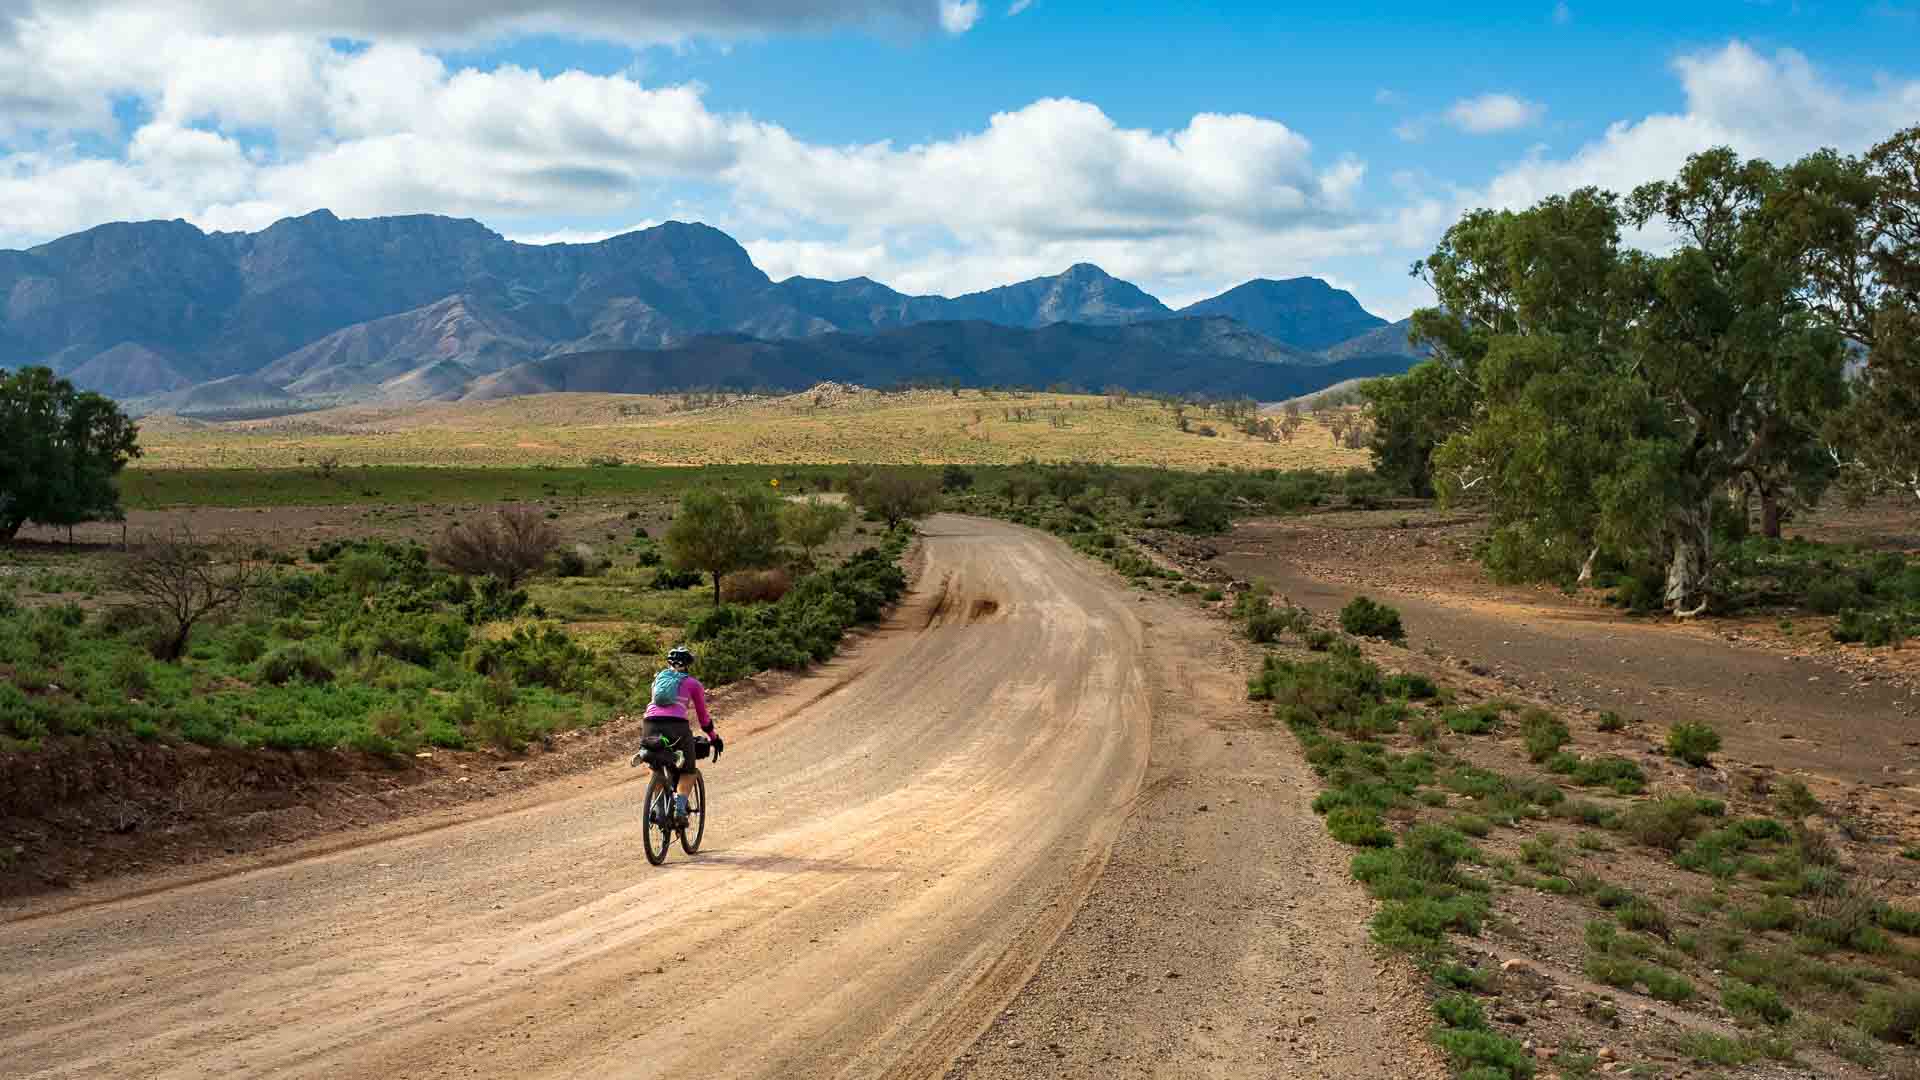 Thinking of riding the Mawson Trail? There's an App for that, too!